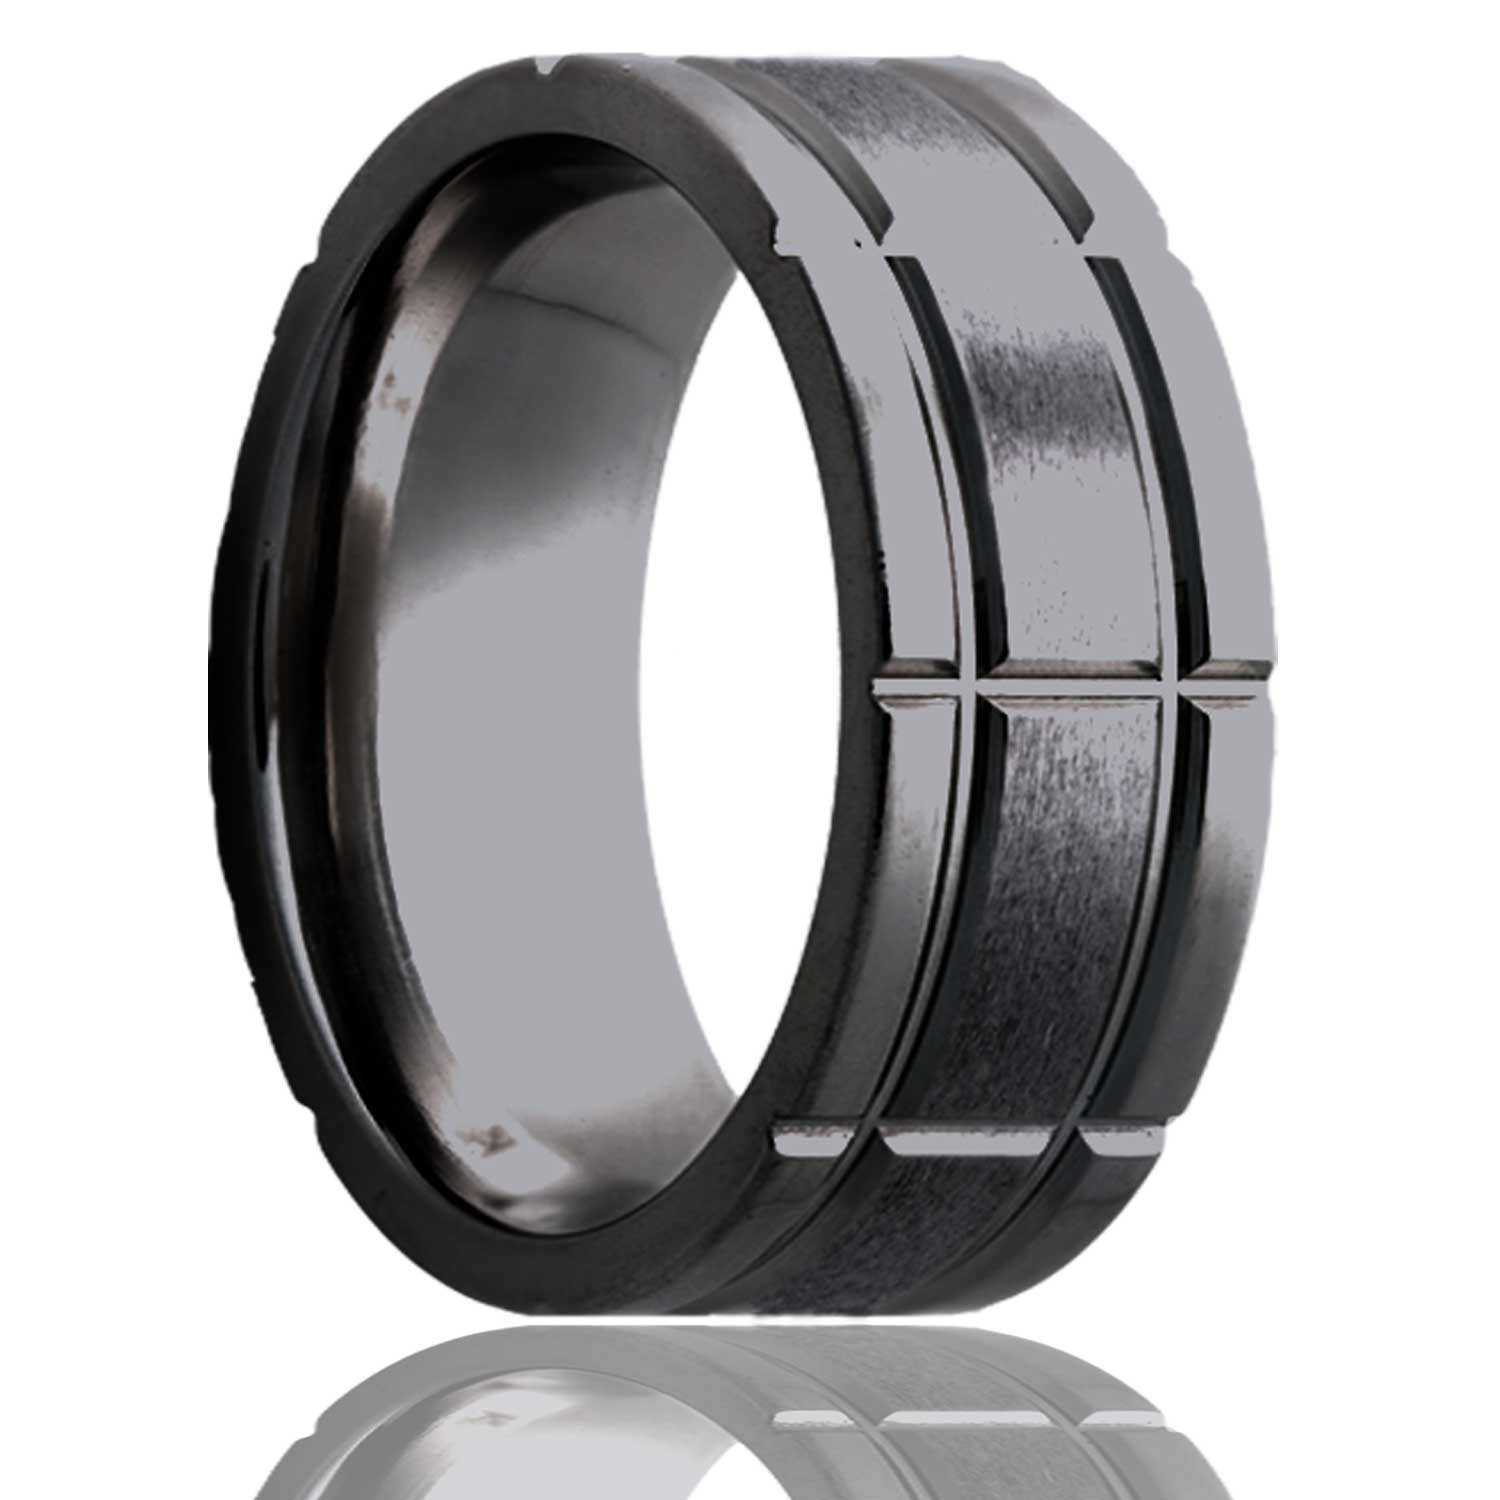 A intersecting groove pattern satin finish zirconium men's wedding band displayed on a neutral white background.